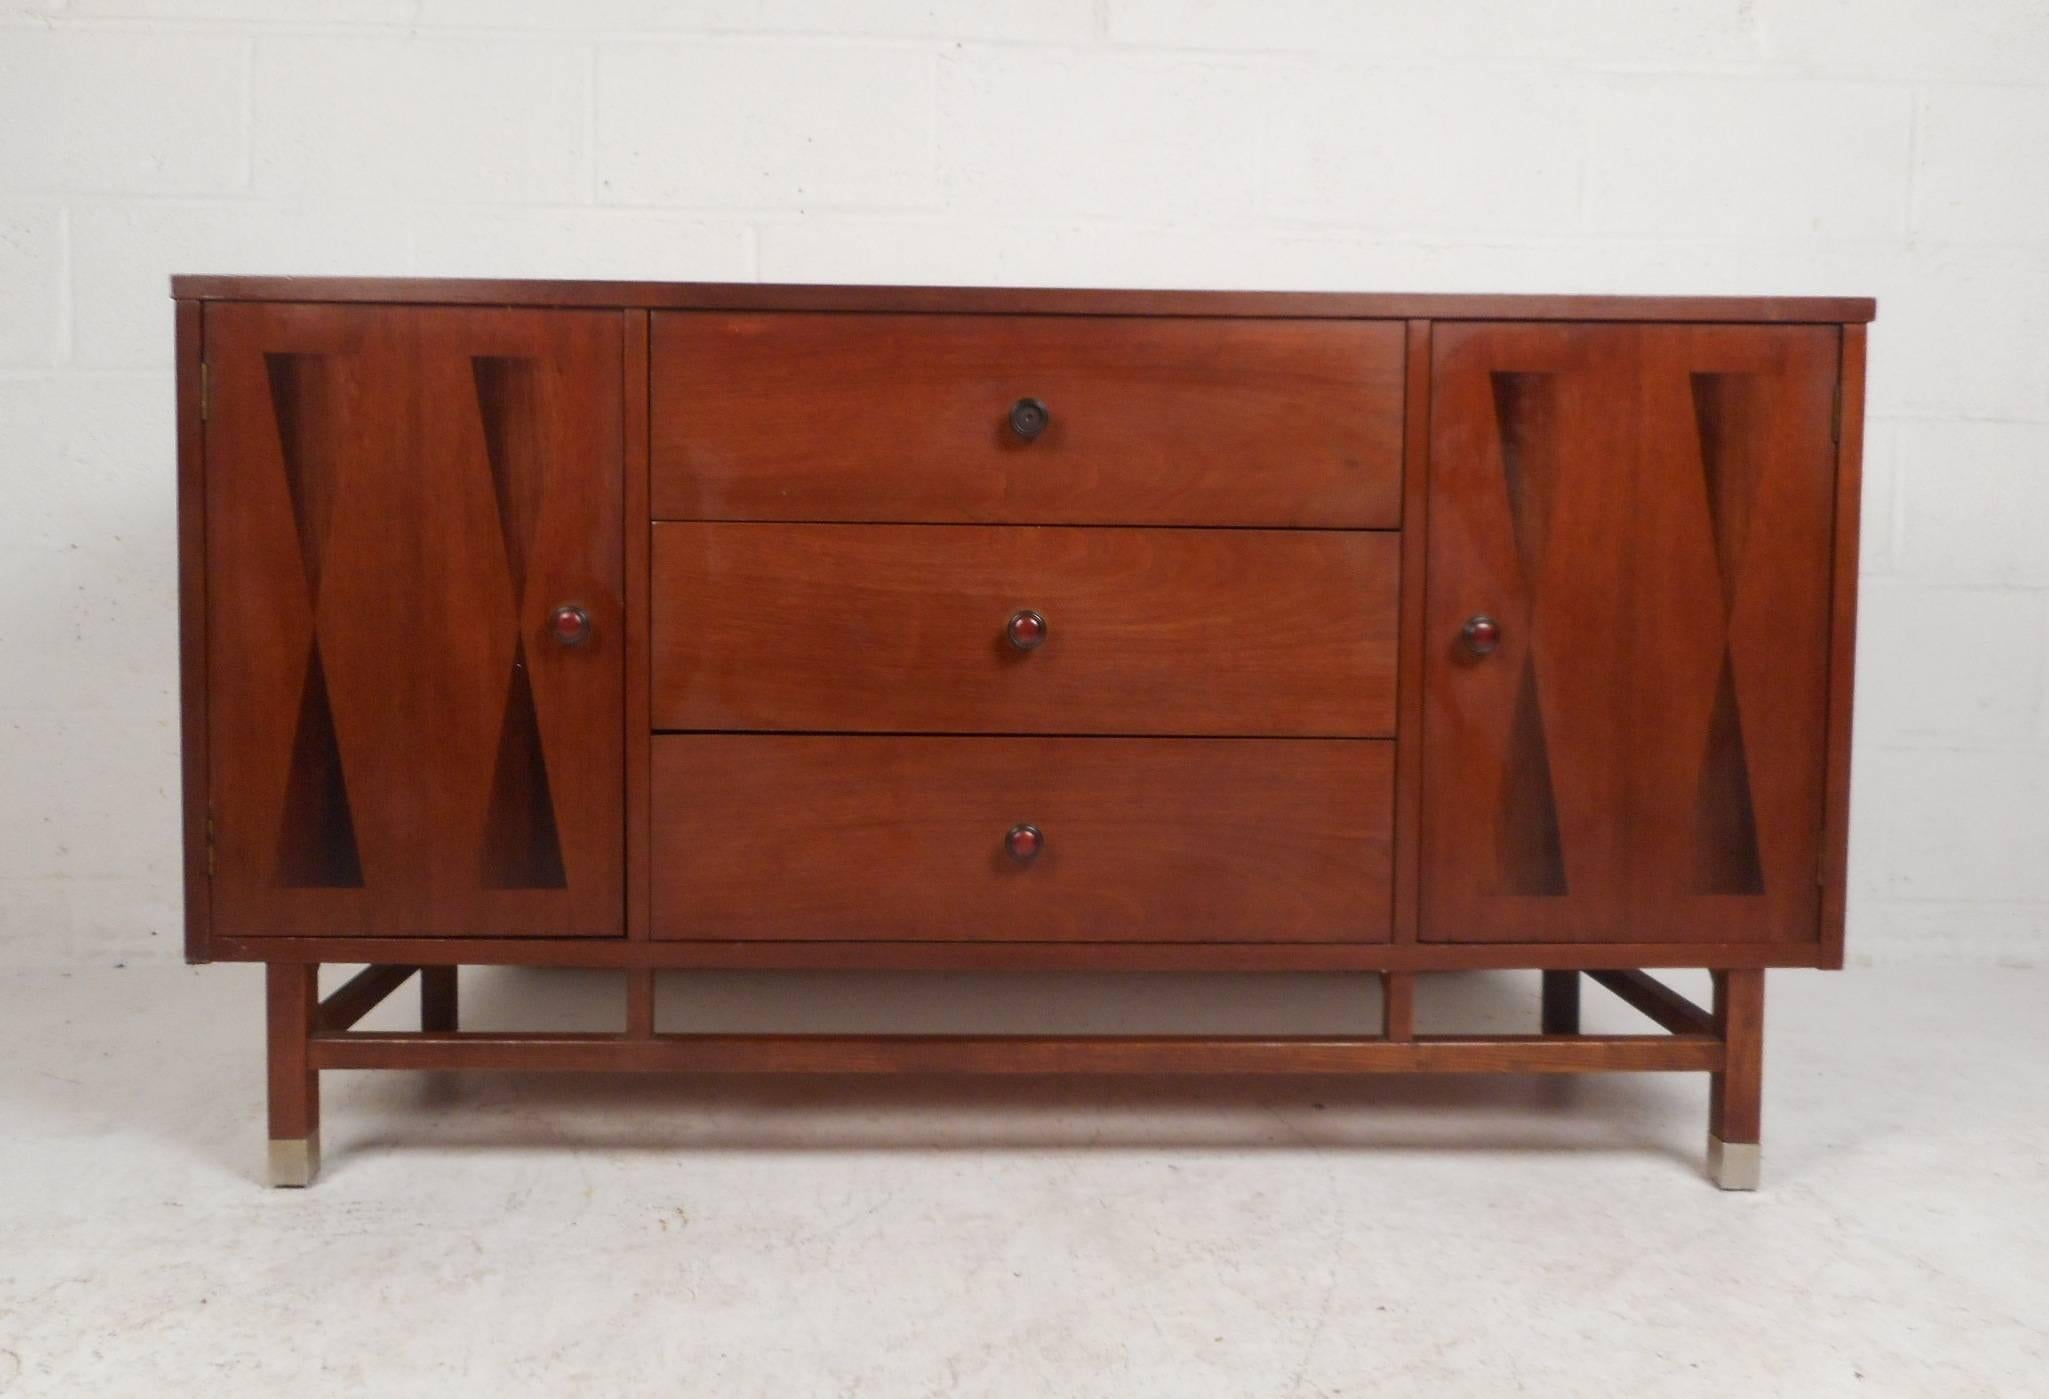 Wonderful vintage modern walnut sideboard with three hefty drawers in the centre and two large compartments on each side hidden by cabinet doors. The sleek design has unique dark colored inlays on the front of each door and stylish circular pulls on